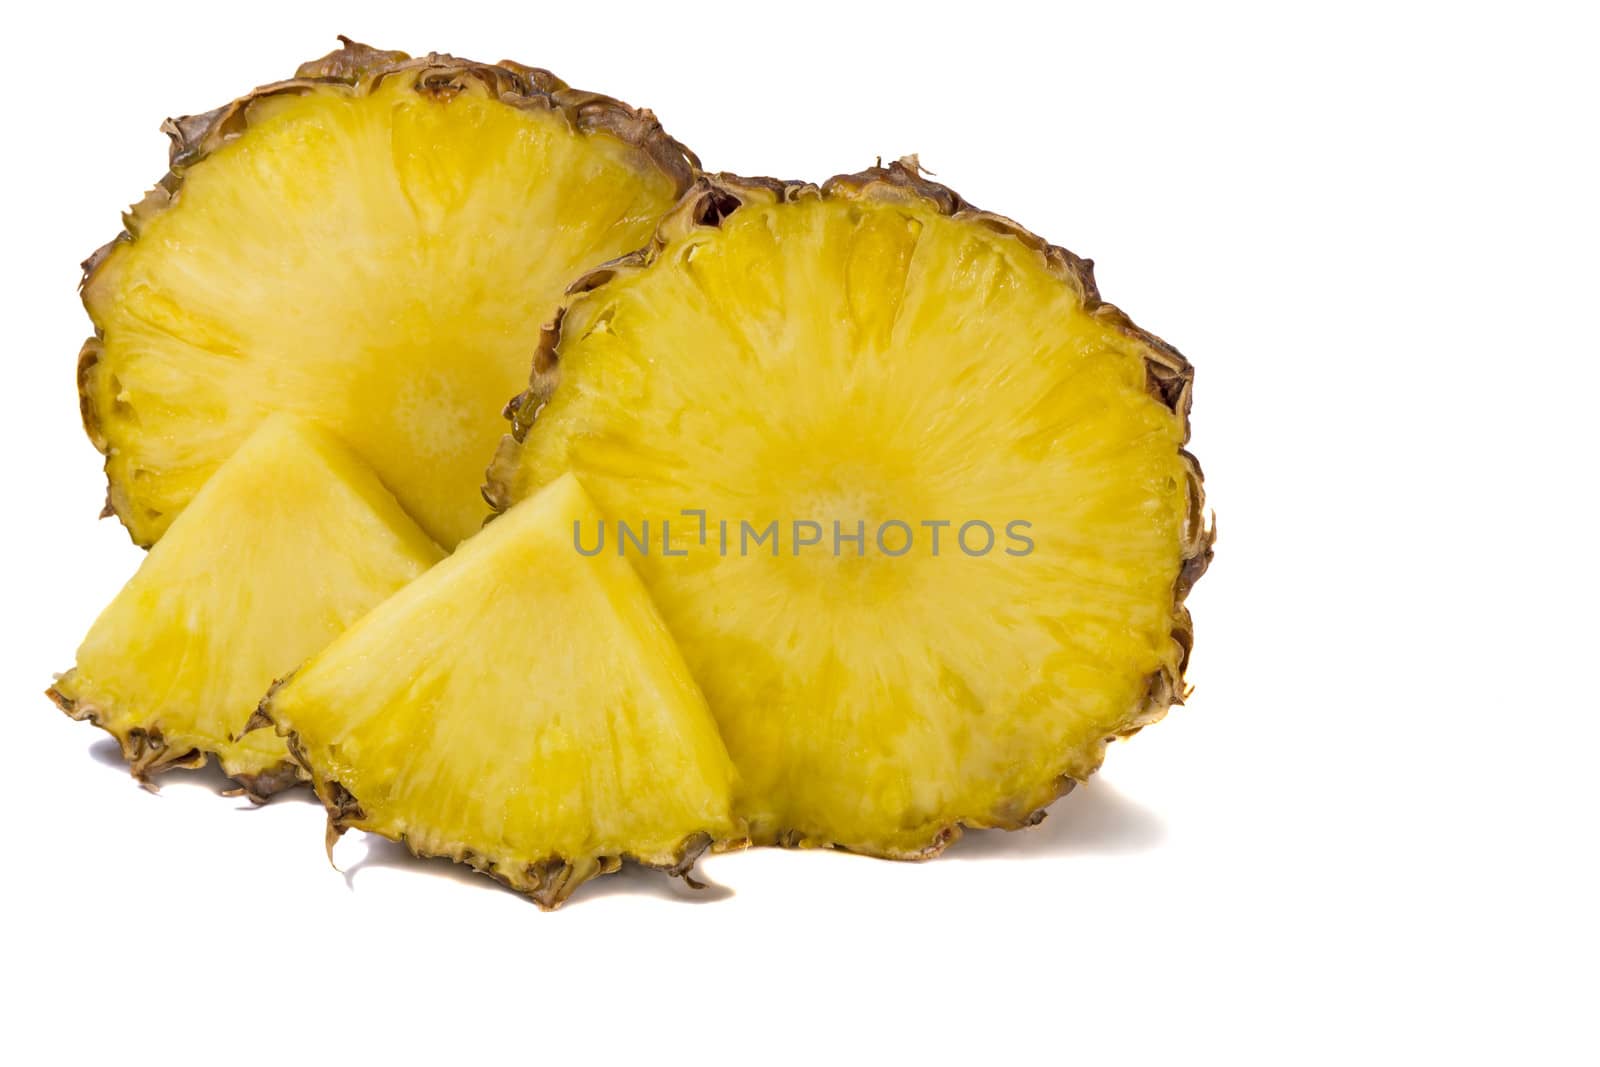 Two large slices of pineapple and two small slices. Presented on a white background.